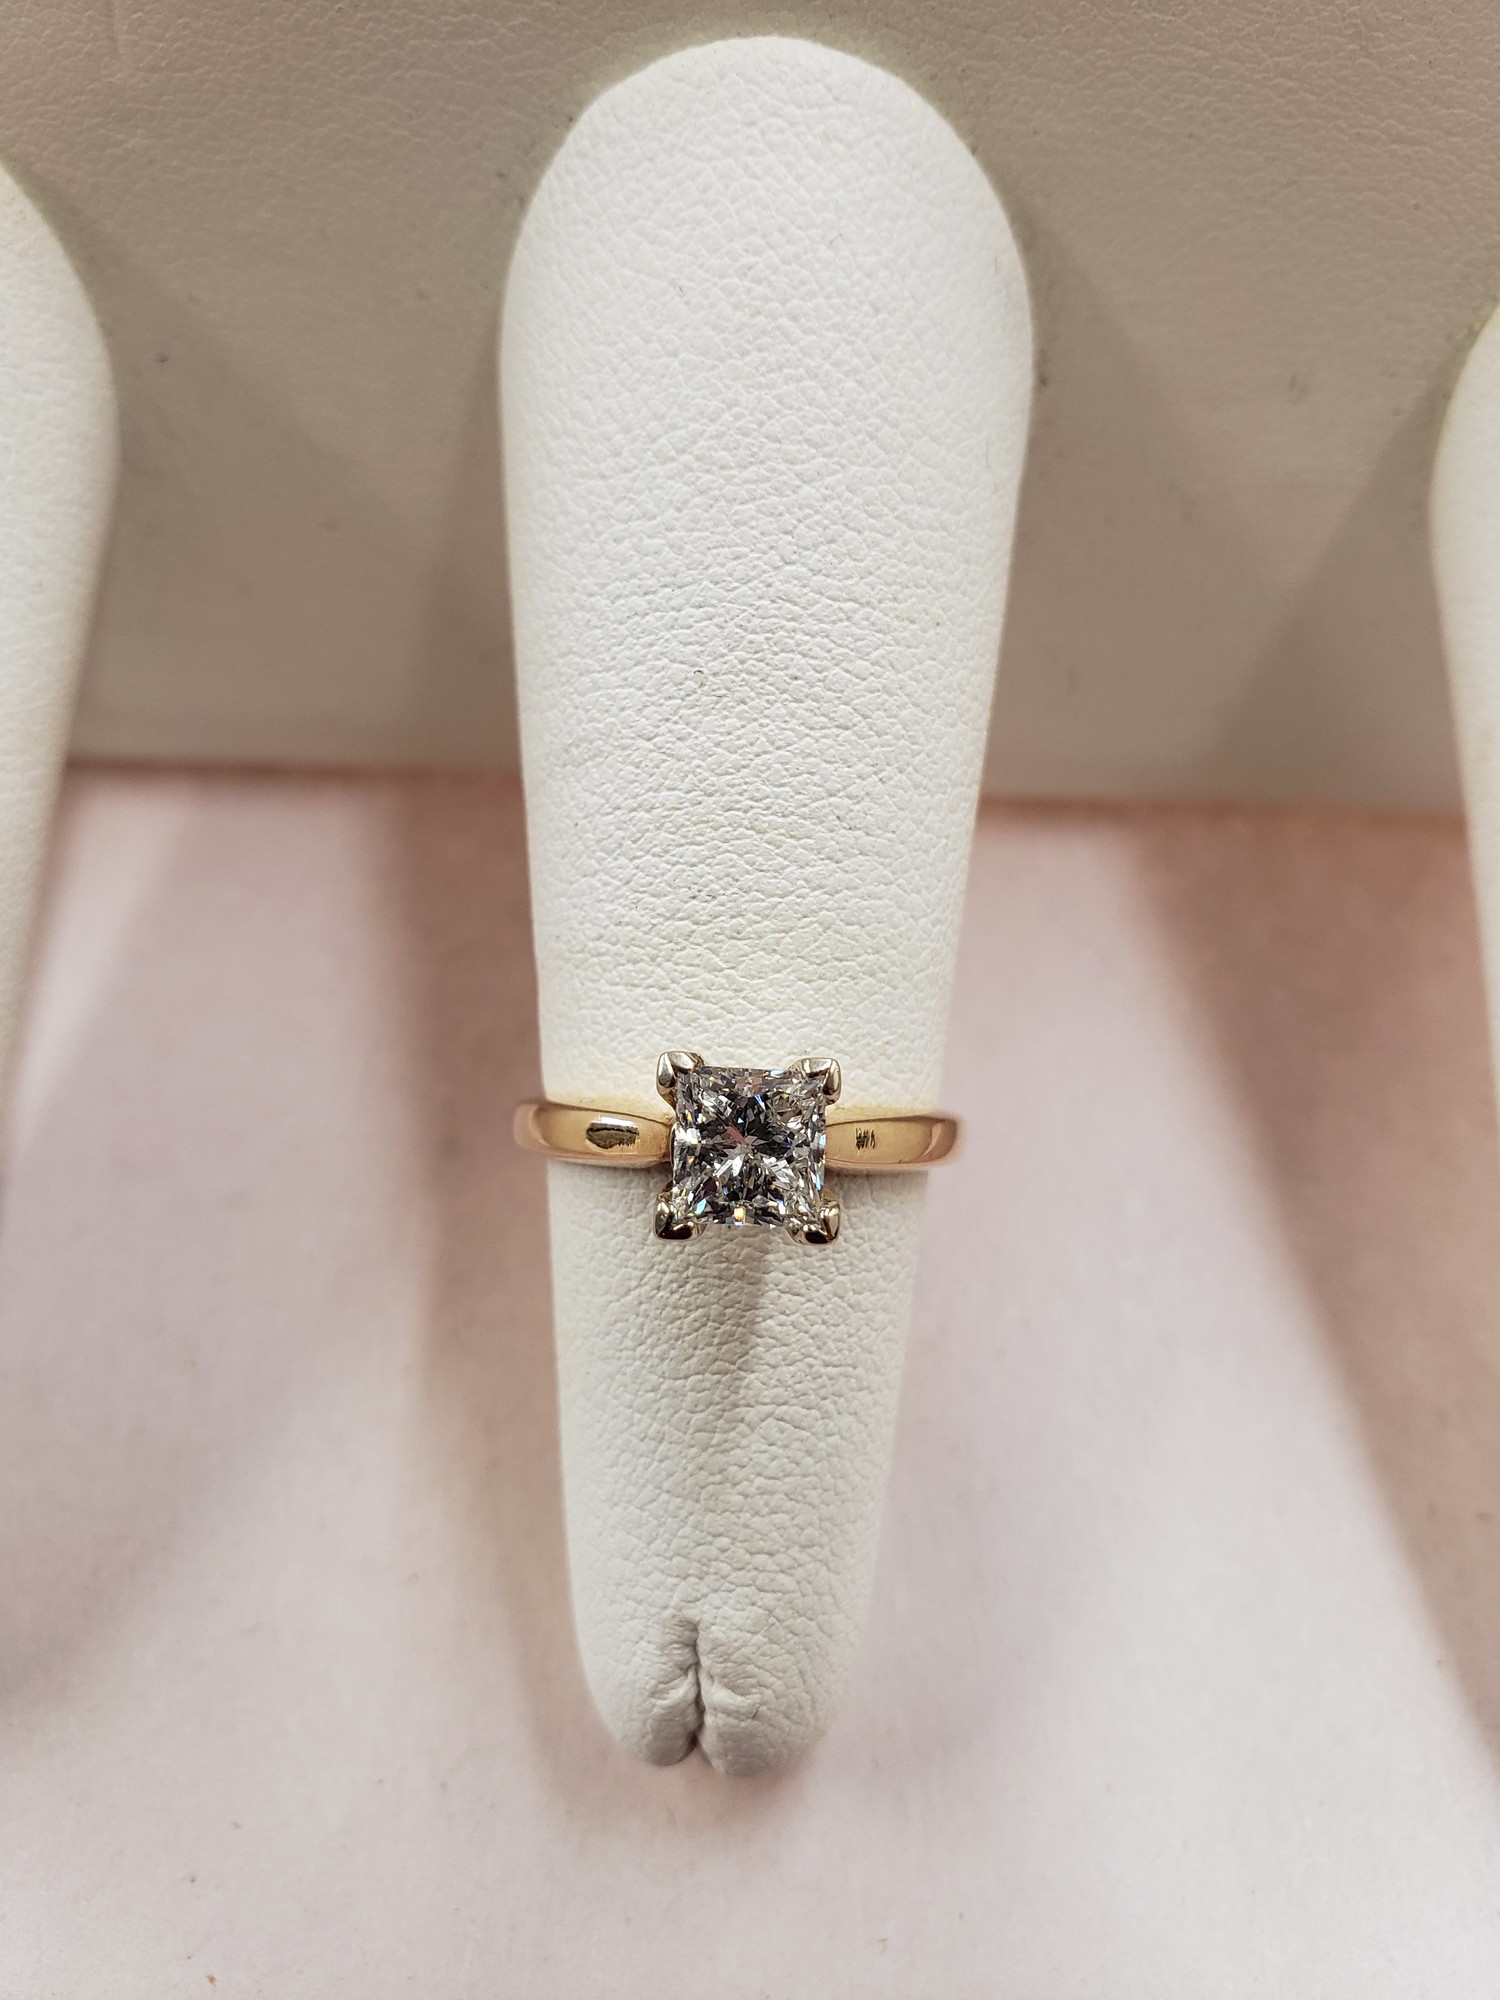 1.01ct H/SI Princess Cut Diamond Ring
Size 7.5

Can be sized up or down for an additional fee
Pictures do not do the jewelry justice.
Photo ID required for pick up of online purchases. We will not ship jewelry purchases.


All jewelry has been checked by a Certified Gemological Institute of America (GIA) Accredited Jewelry Professional (AJP) and/or appraised by a certified local jeweler.